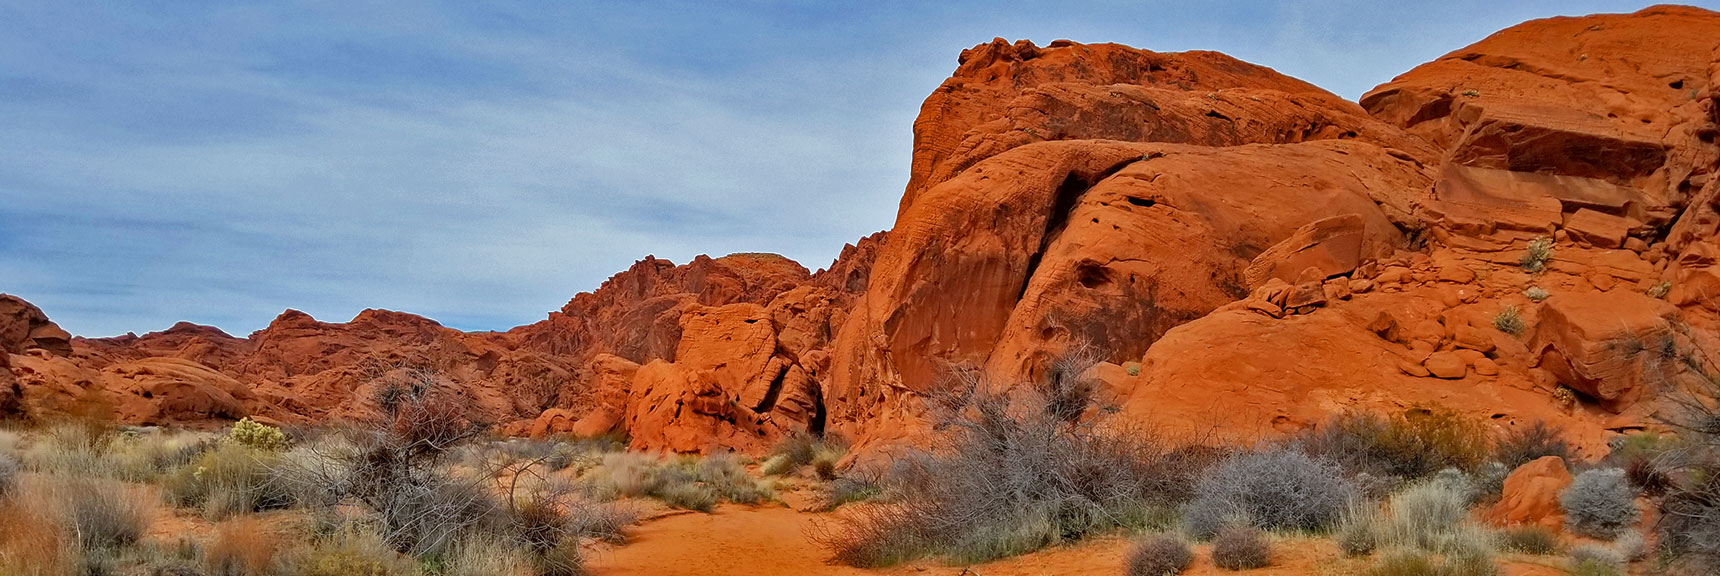 The Canyon Opens Up Again in Fire Canyon in Valley of Fire State Park, Nevada